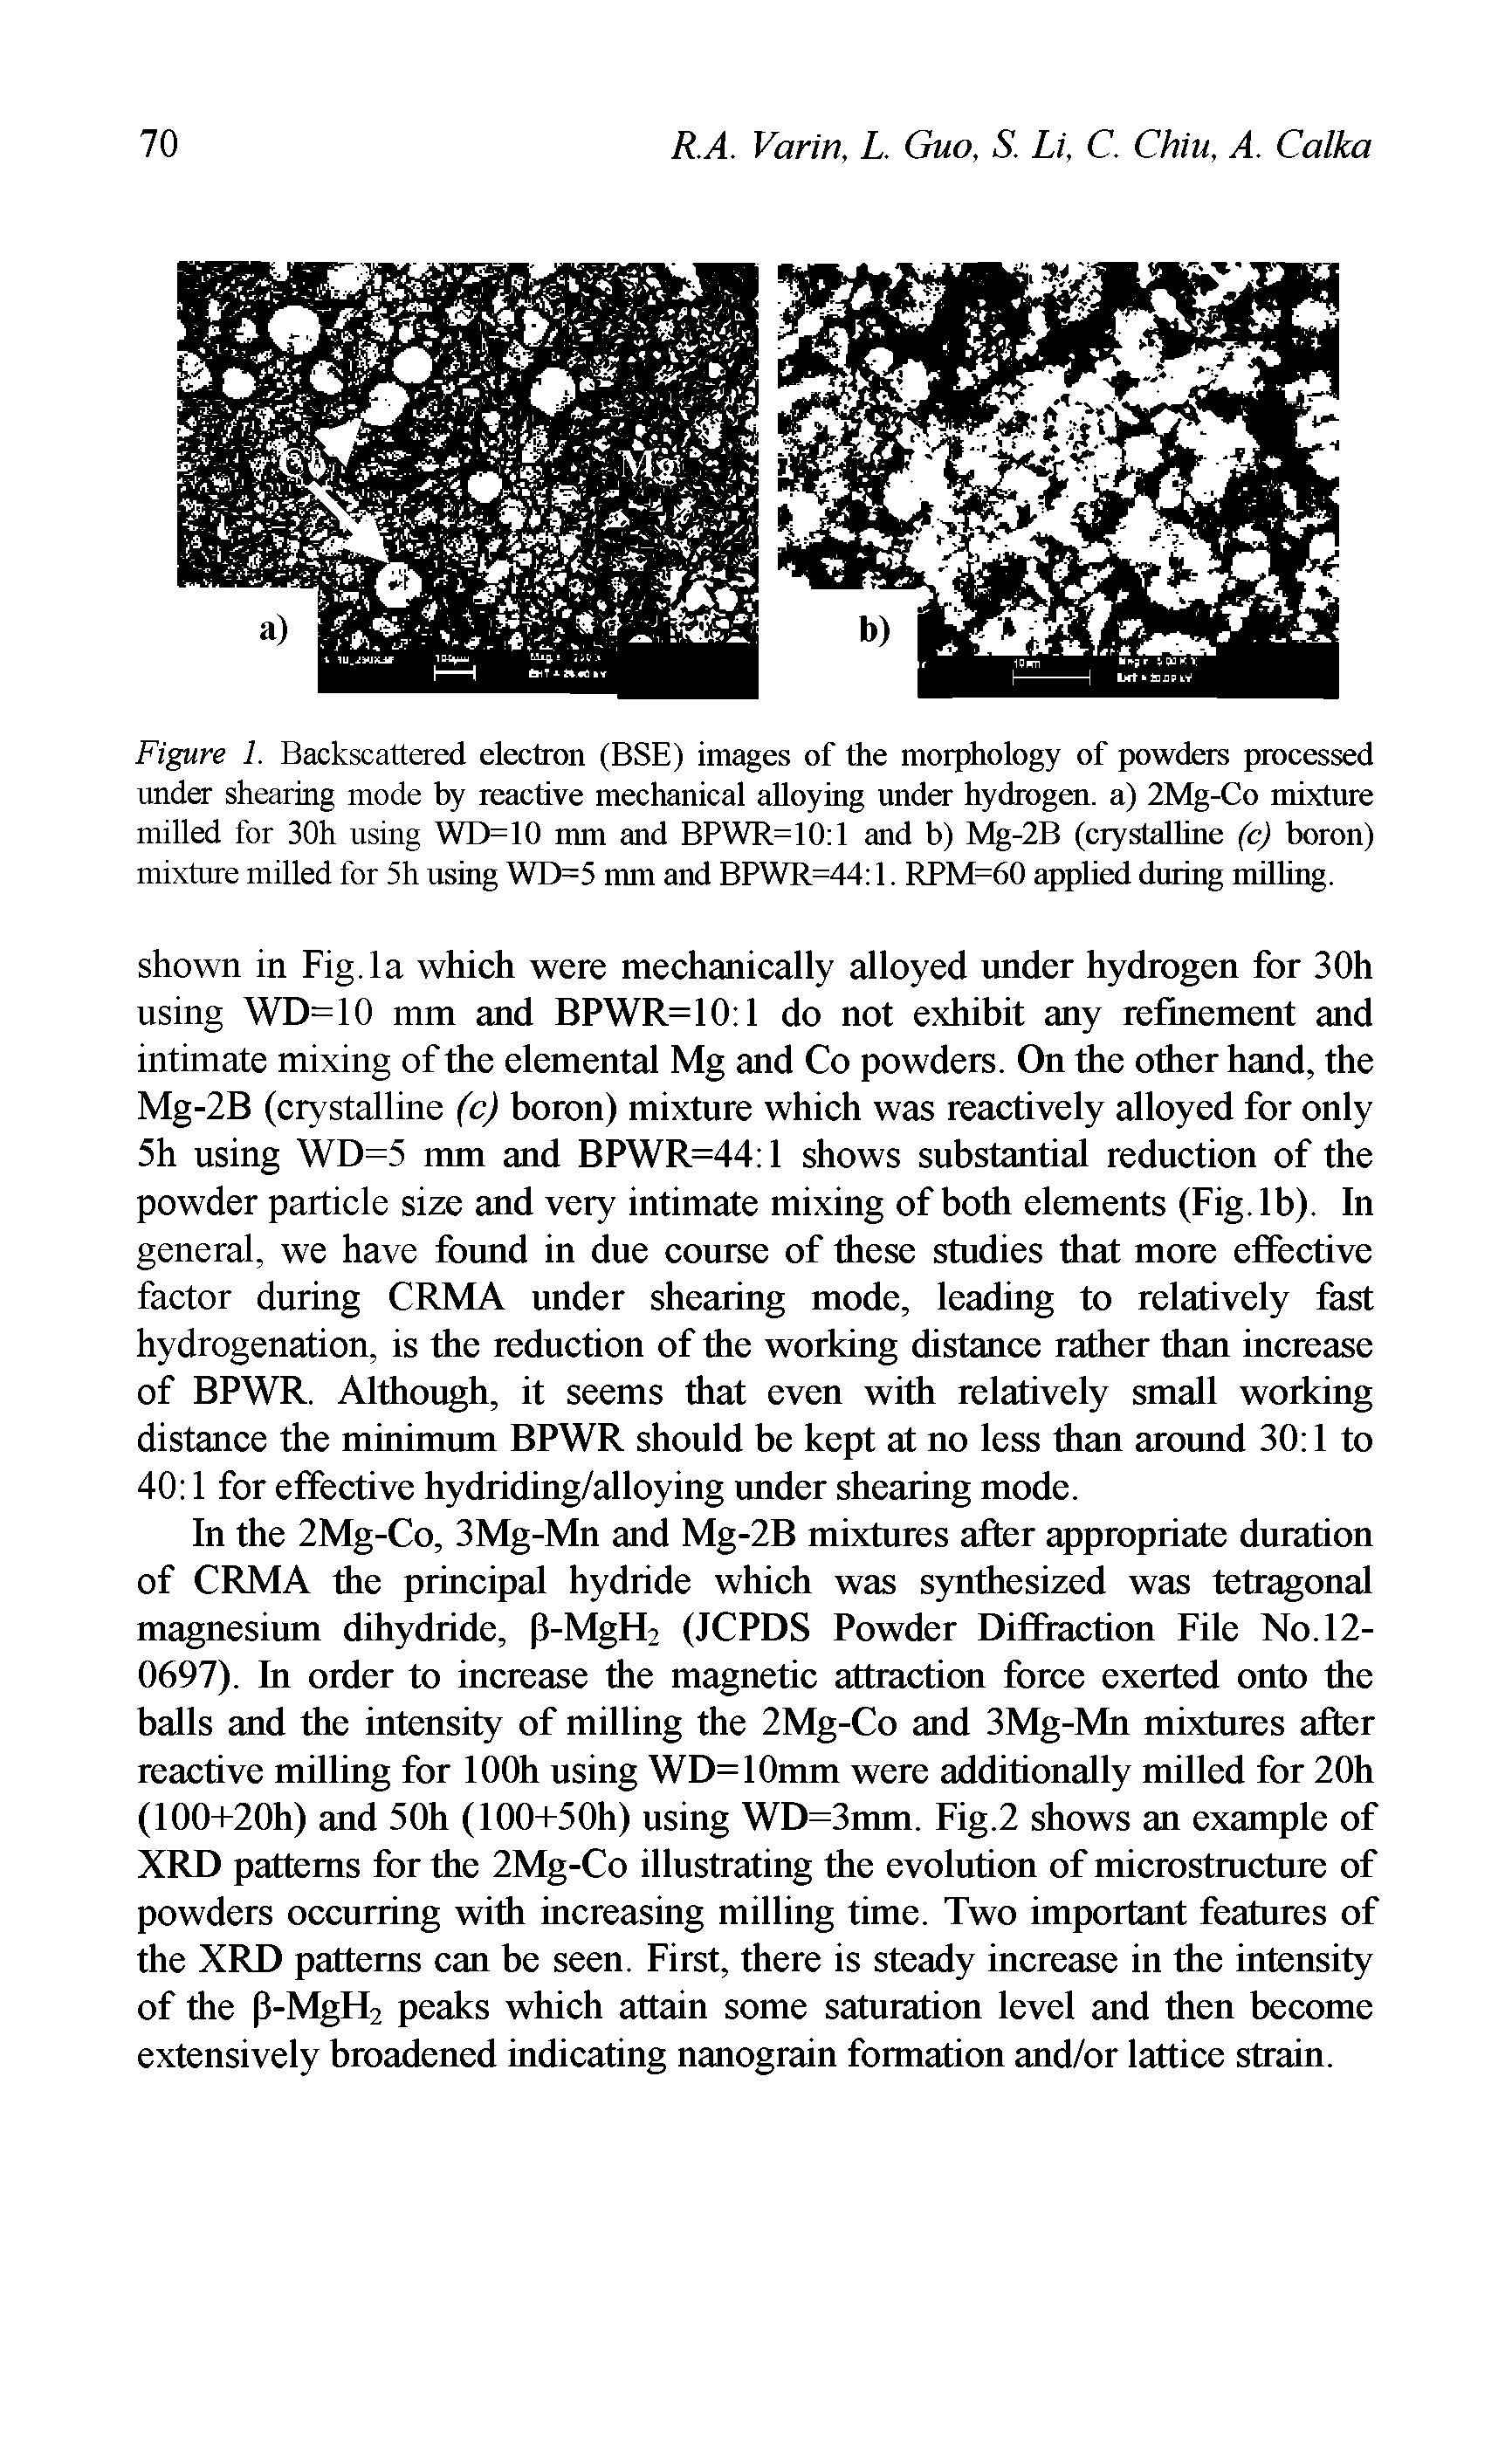 Figure 1. Backscattered electron (BSE) images of the morphology of powders processed under shearing mode by reactive mechanical alloying under hydrogen, a) 2Mg-Co mixture milled for 30h using WD=10 mm and BPWR=10 1 and b) Mg-2B (crystalline (c) boron) mixture milled for 5h using WD=5 mm and BPWR=44 1. RPM=60 applied during milling.